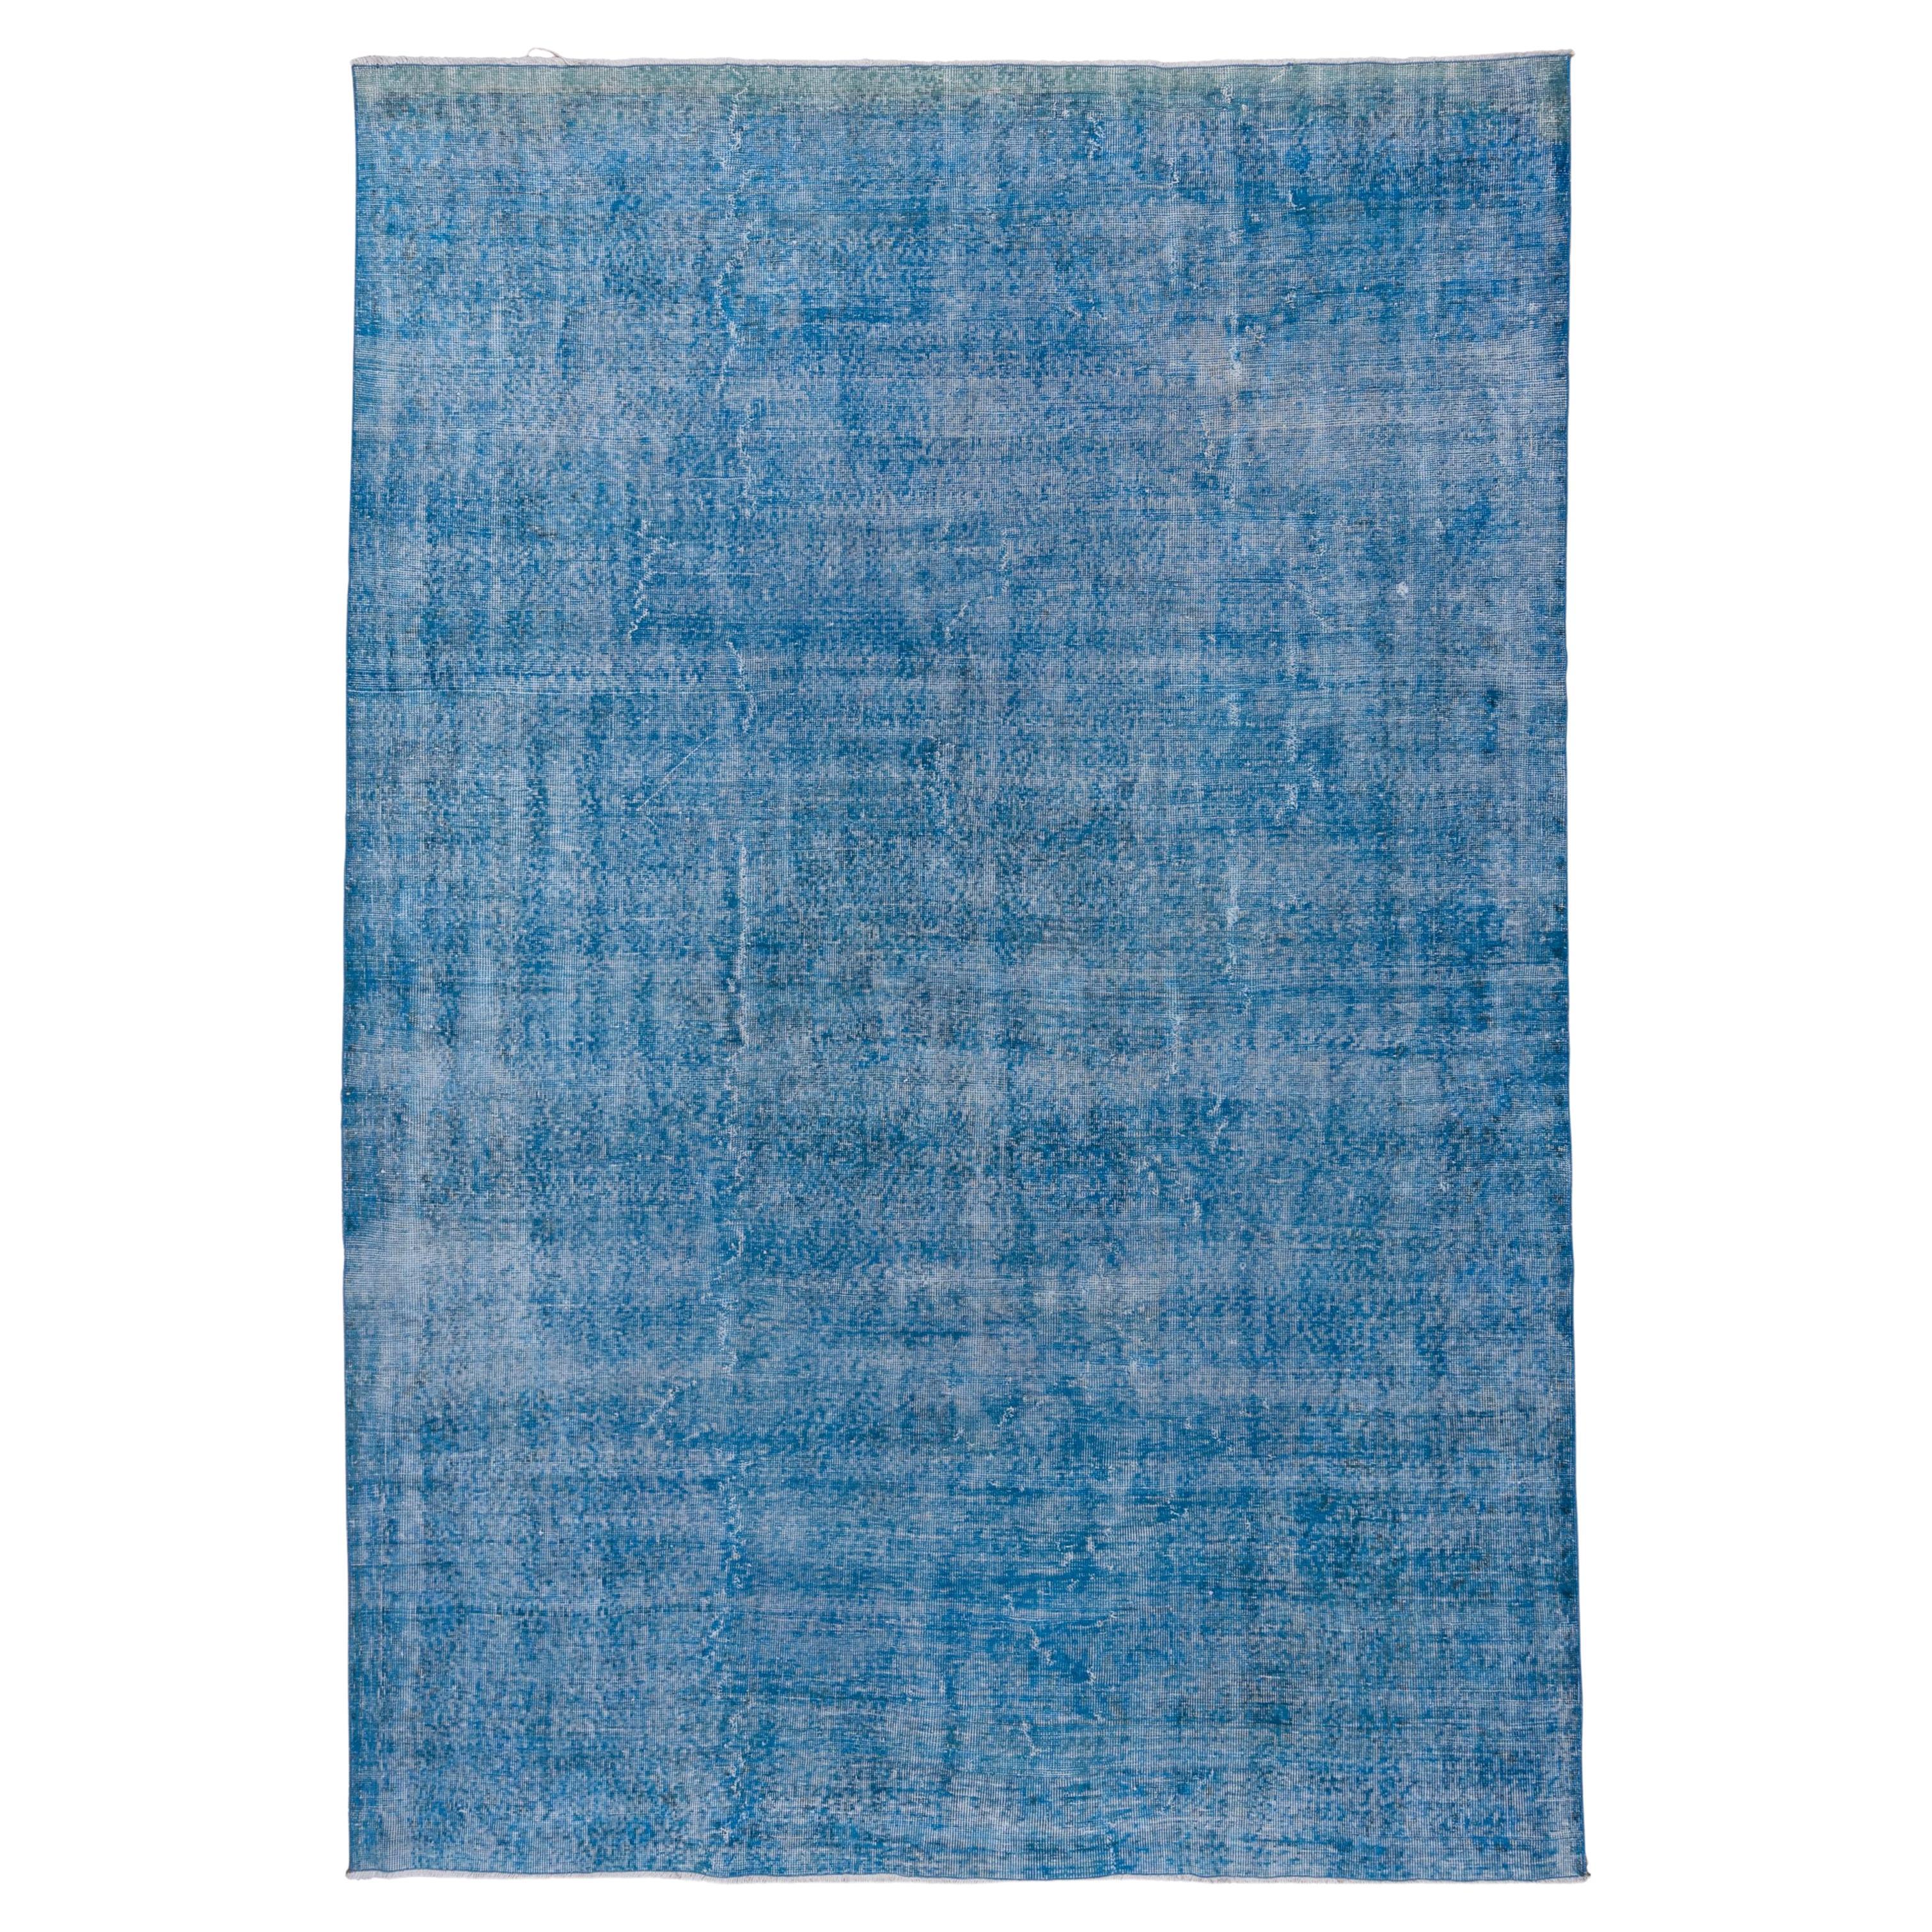 Vintage Blue Overdyed Sparta Wool Rug, Shabby Chic, Bright Blue For Sale